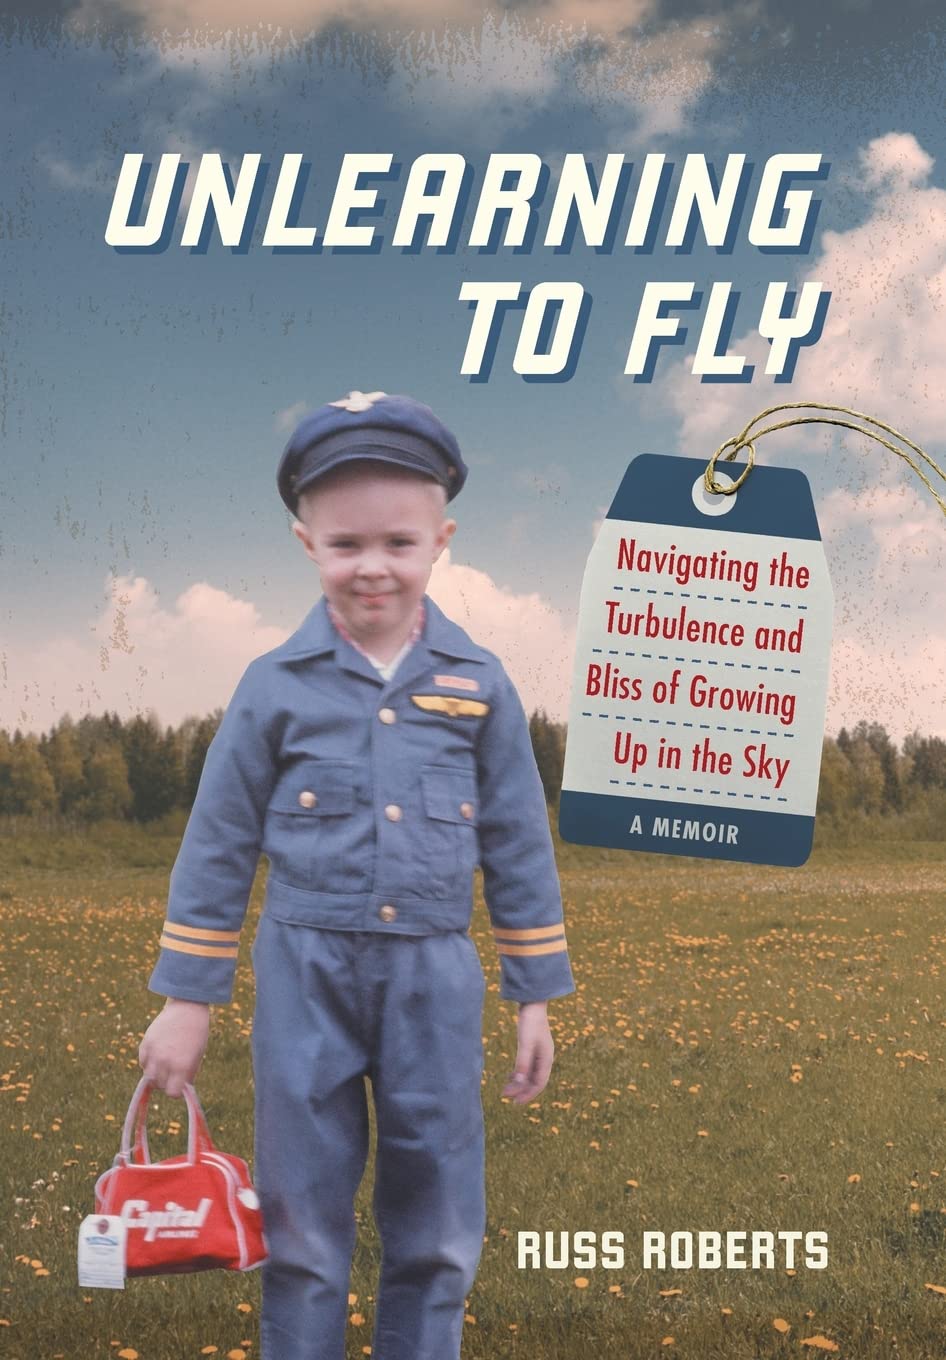 Unlearning to Fly: Navigating the Turbulence and Bliss of Growing Up in the Sky [Hardcover] Roberts, Russ